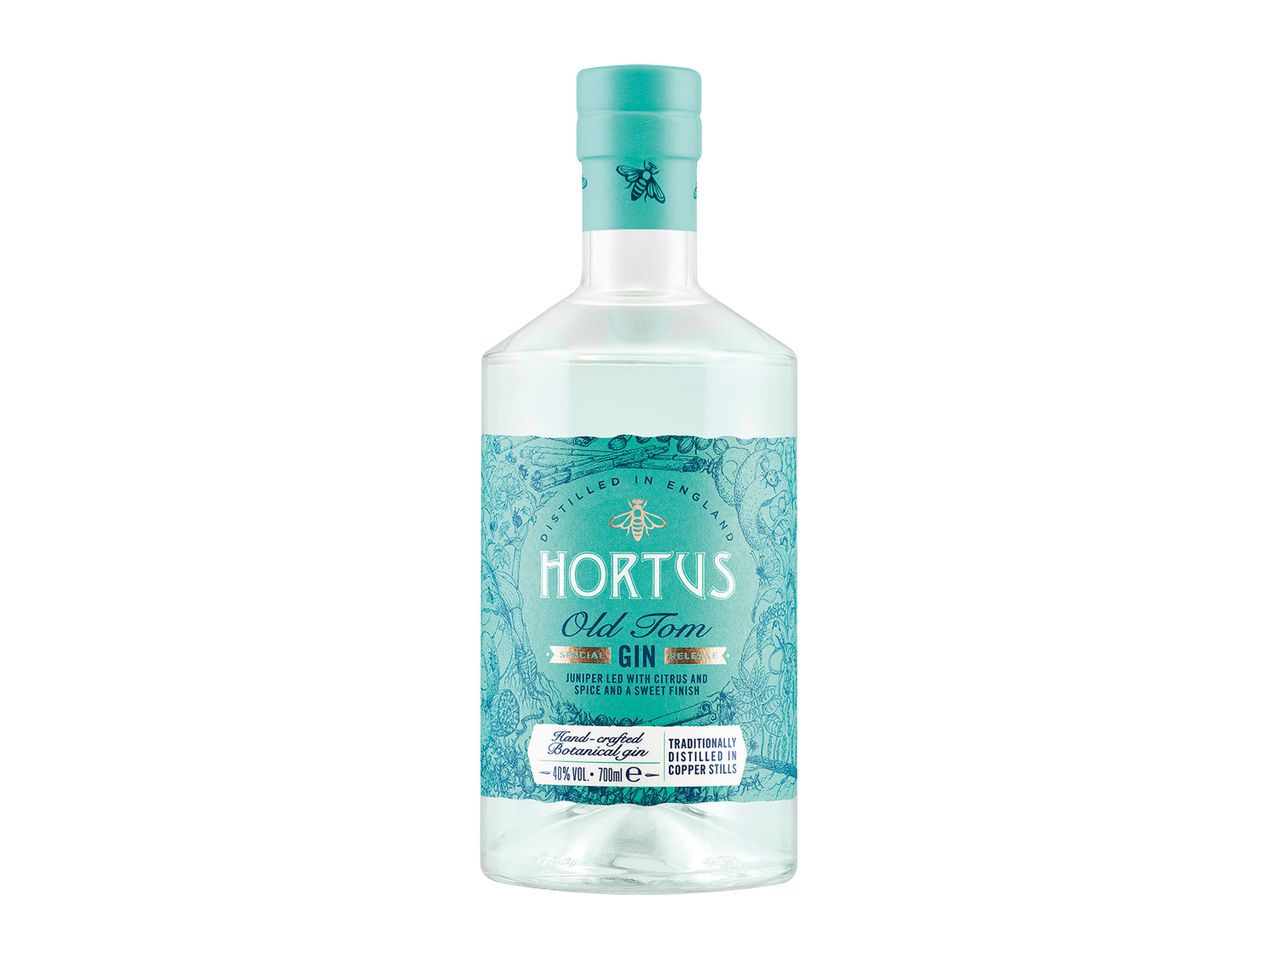 Go to full screen view: Hortus Old Tom Gin - Image 1